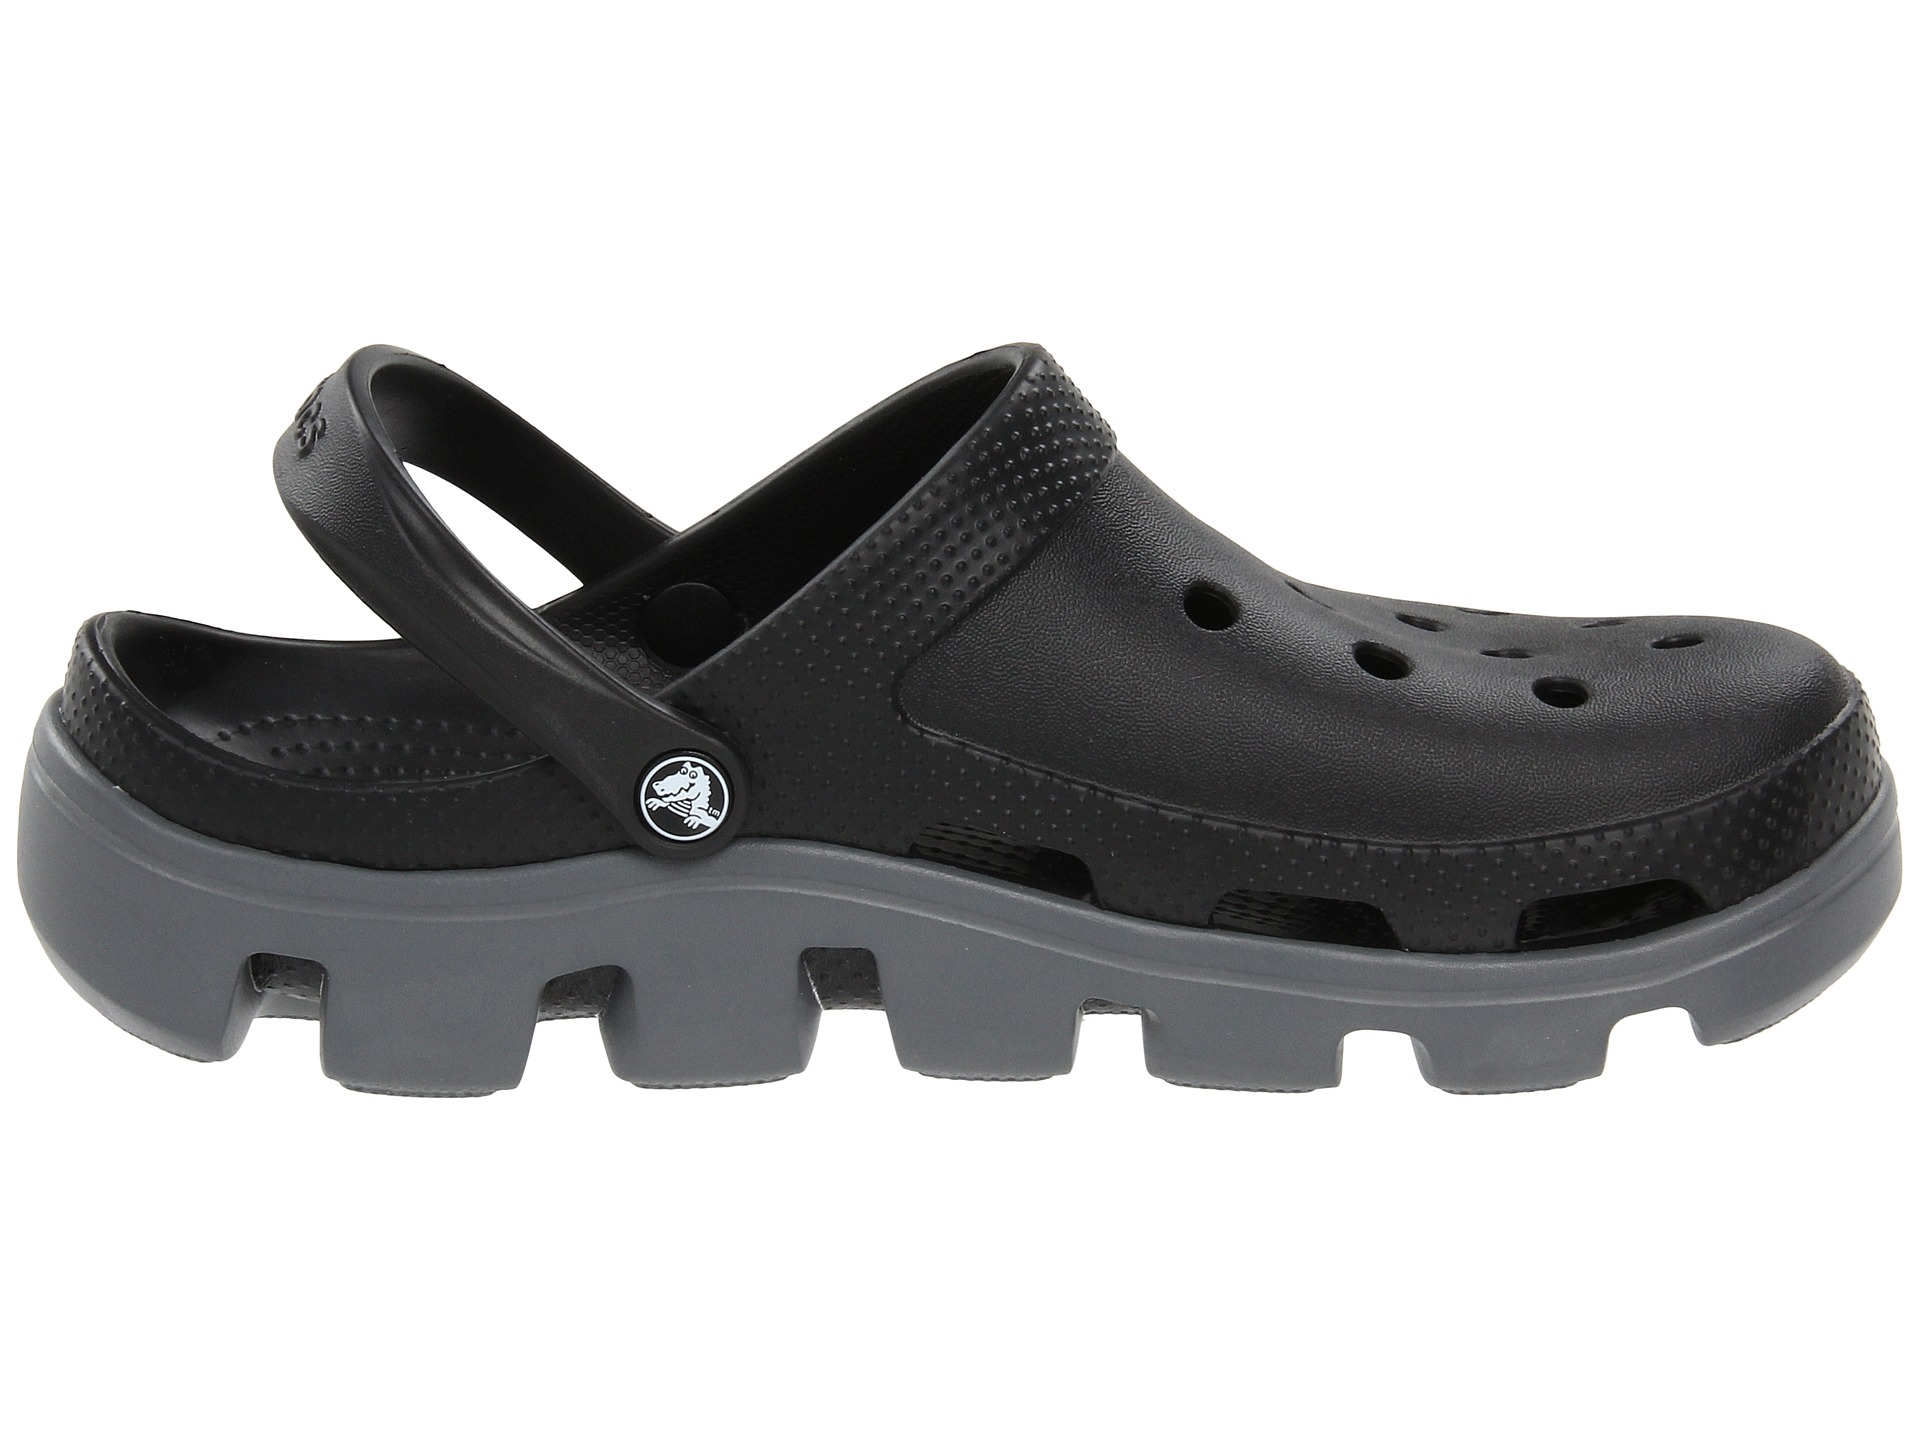 Crocs Duet Sport Clog, Shoes | Shipped Free at Zappos